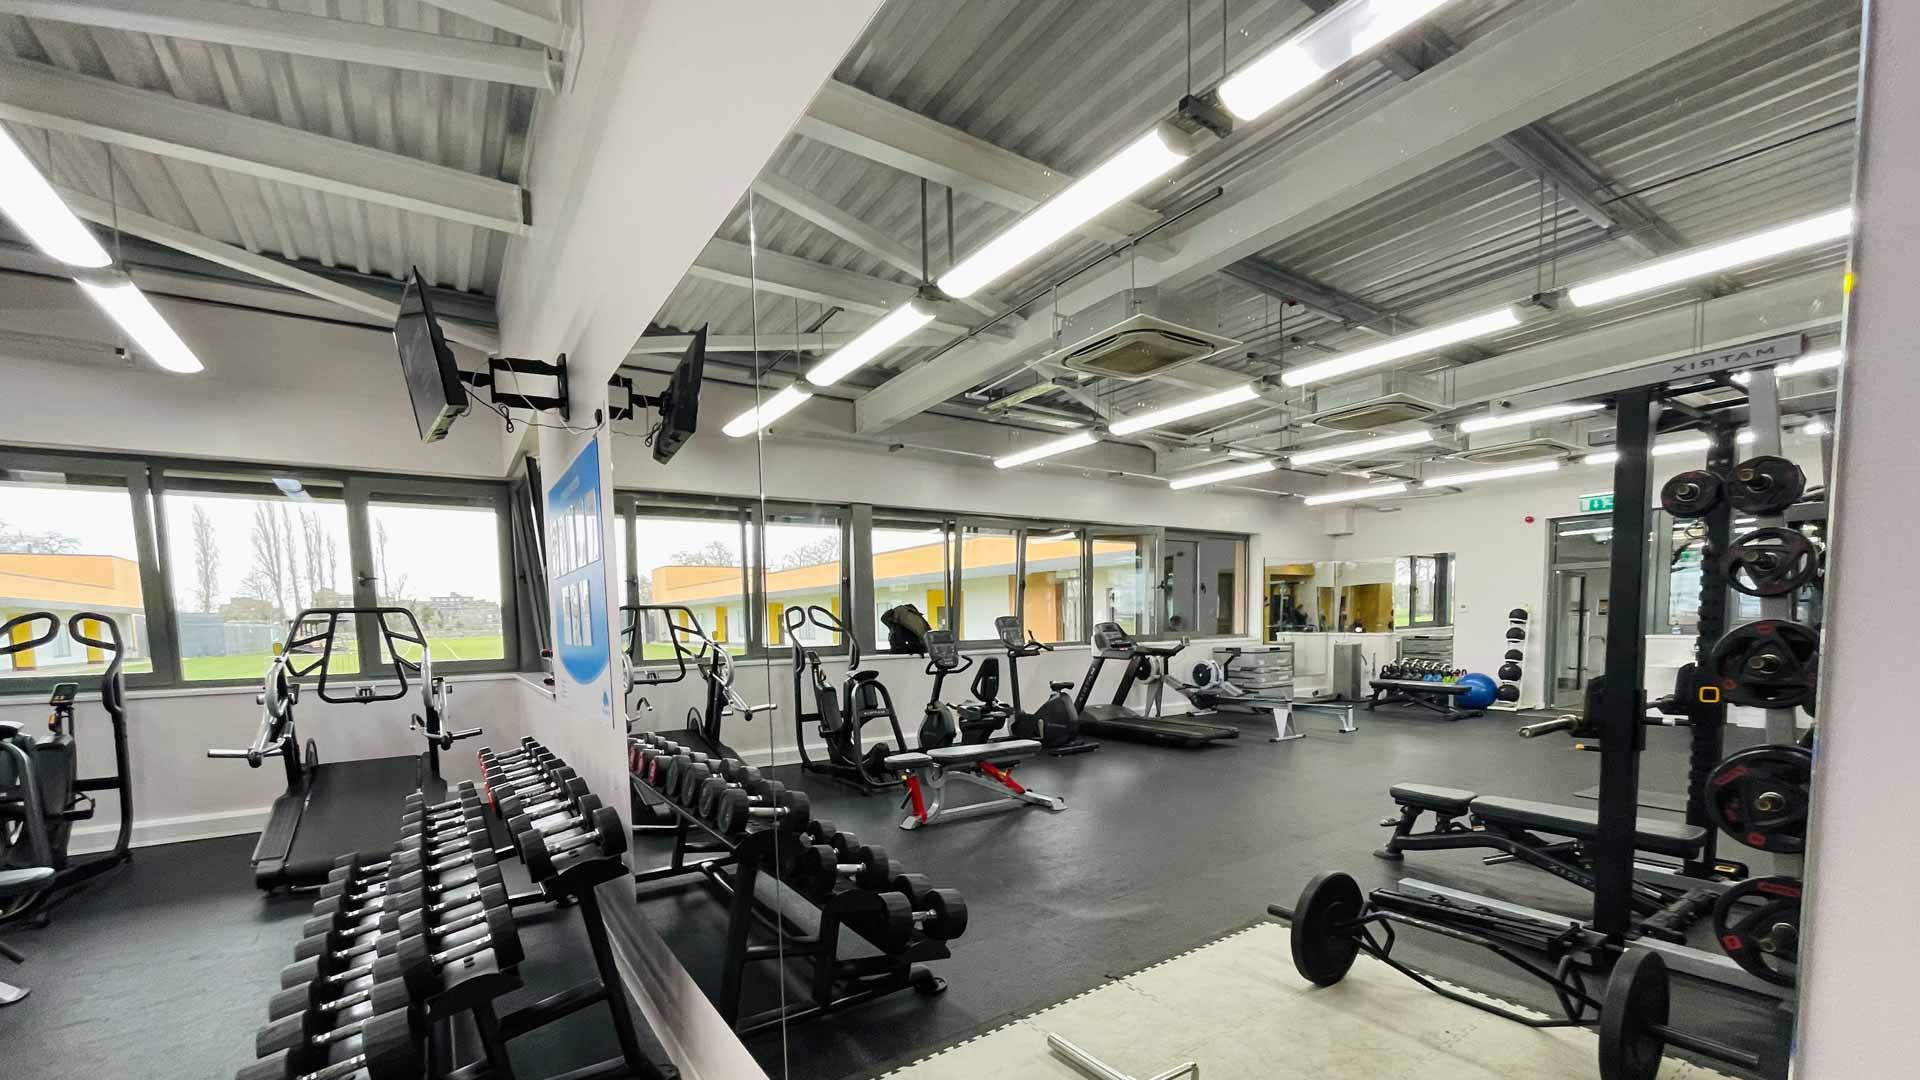 Inside the Barn Elms Sports Centre gym building. Steel frame building with gym equipment.